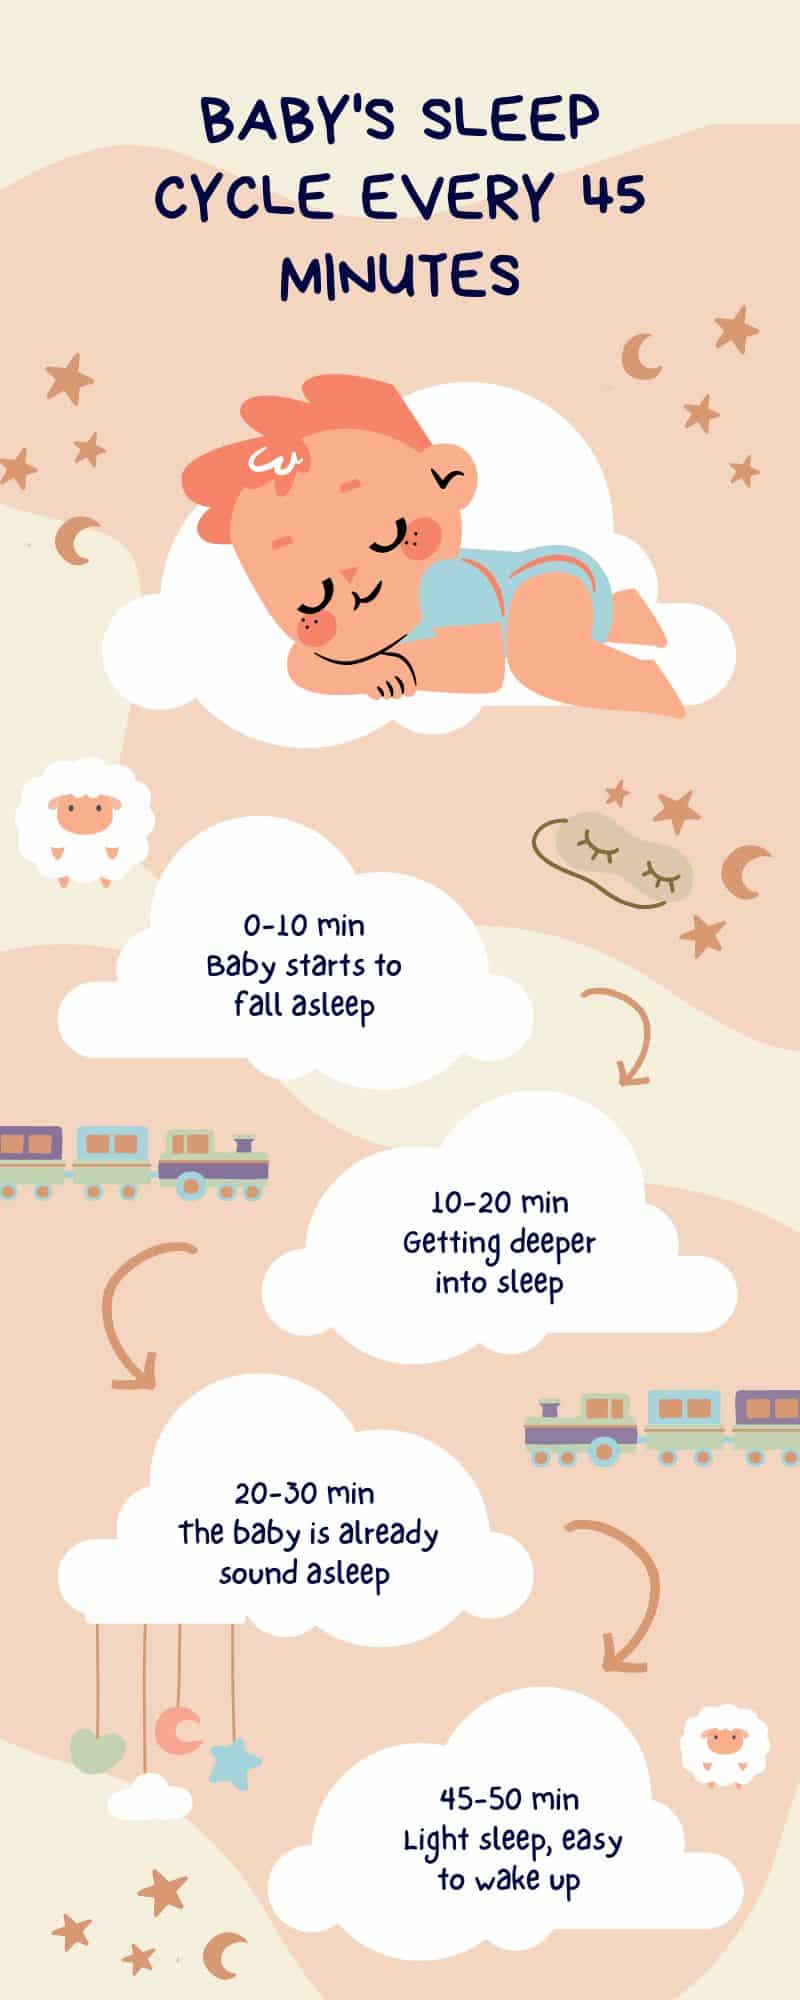 Baby Sleep: Tips, Techniques, and Products to Help Your Little One Sleep Better